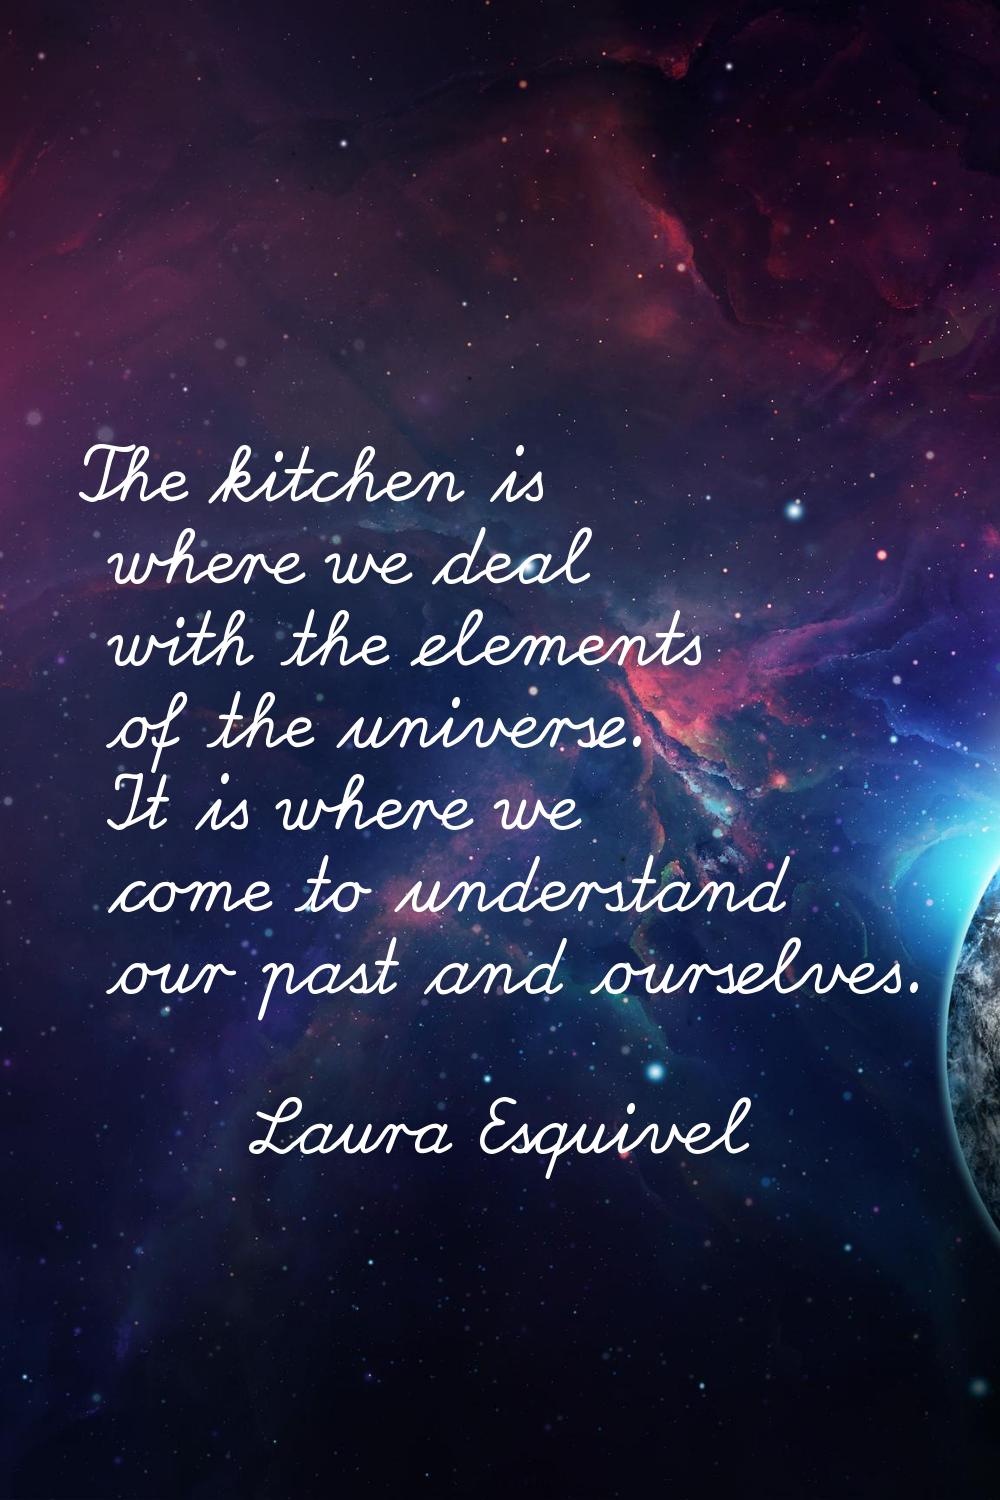 The kitchen is where we deal with the elements of the universe. It is where we come to understand o